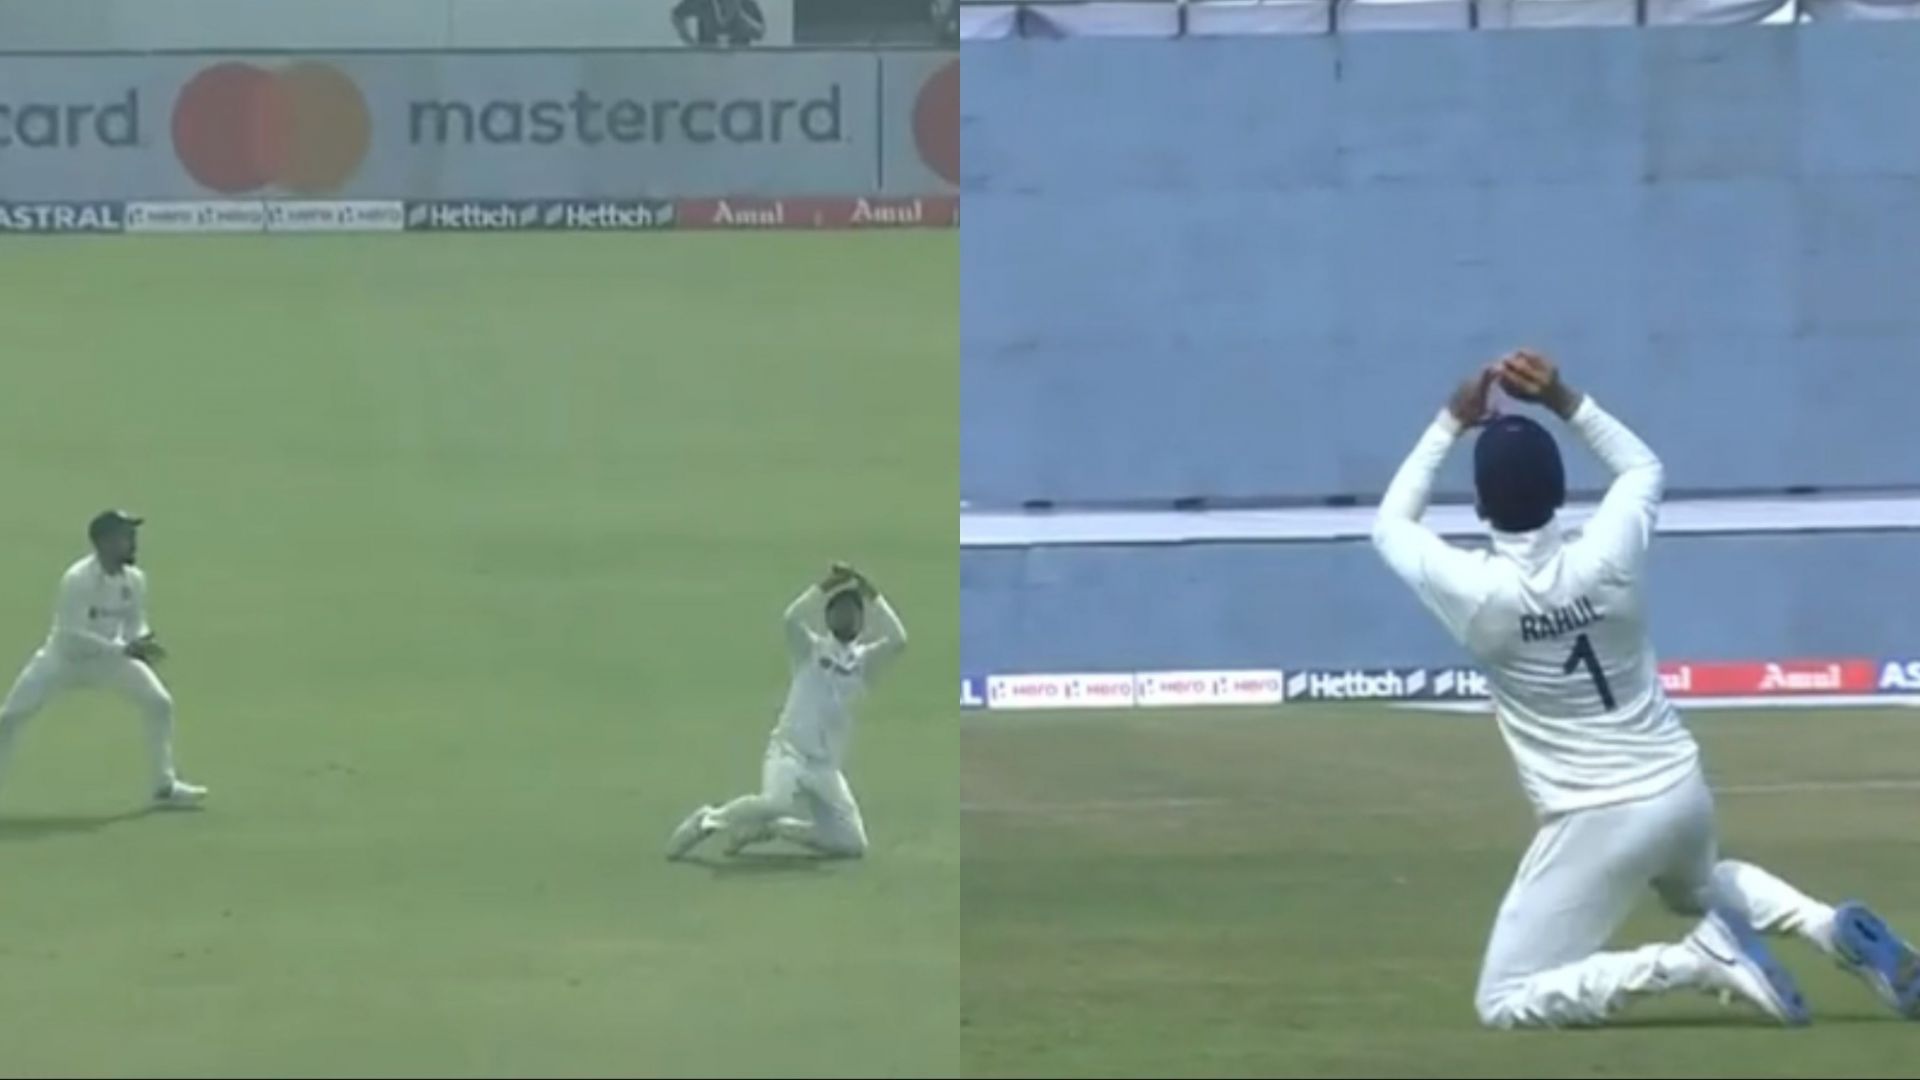 KL Rahul took a great catch in the slips (Image: BCCI)